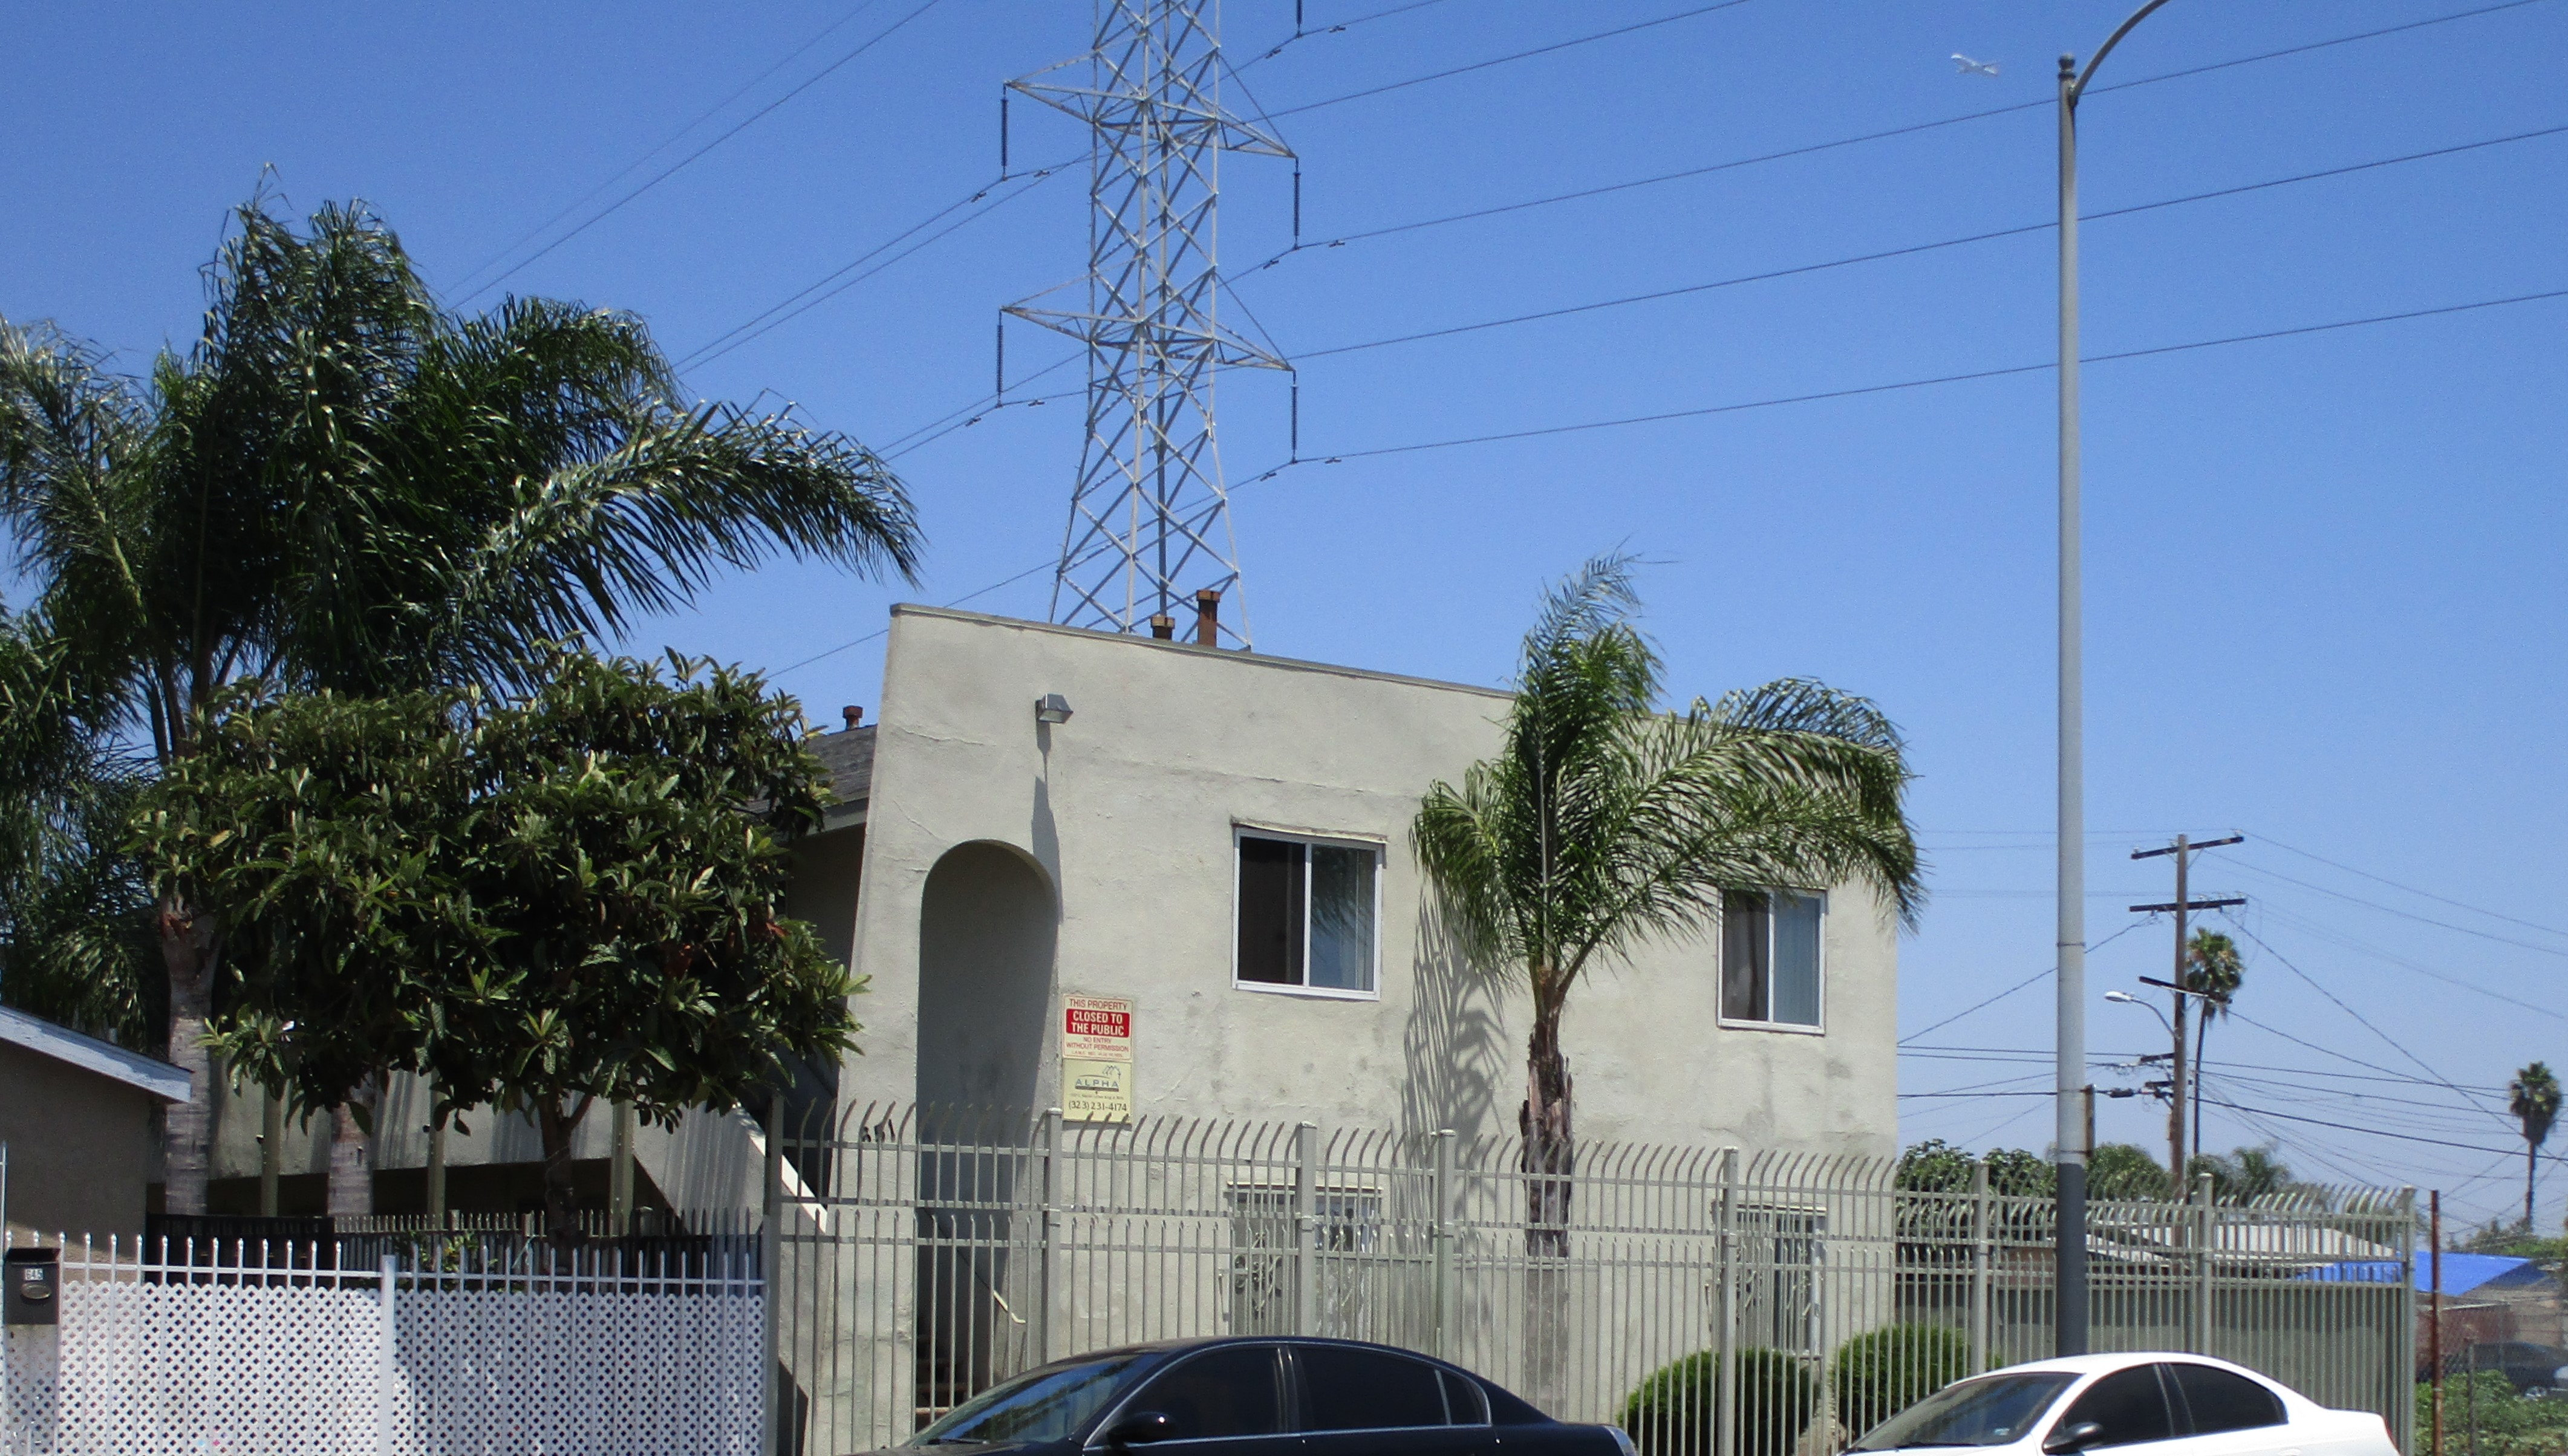 View of a two story gated building, four windows, palm tree and bushes in front, parked cars.